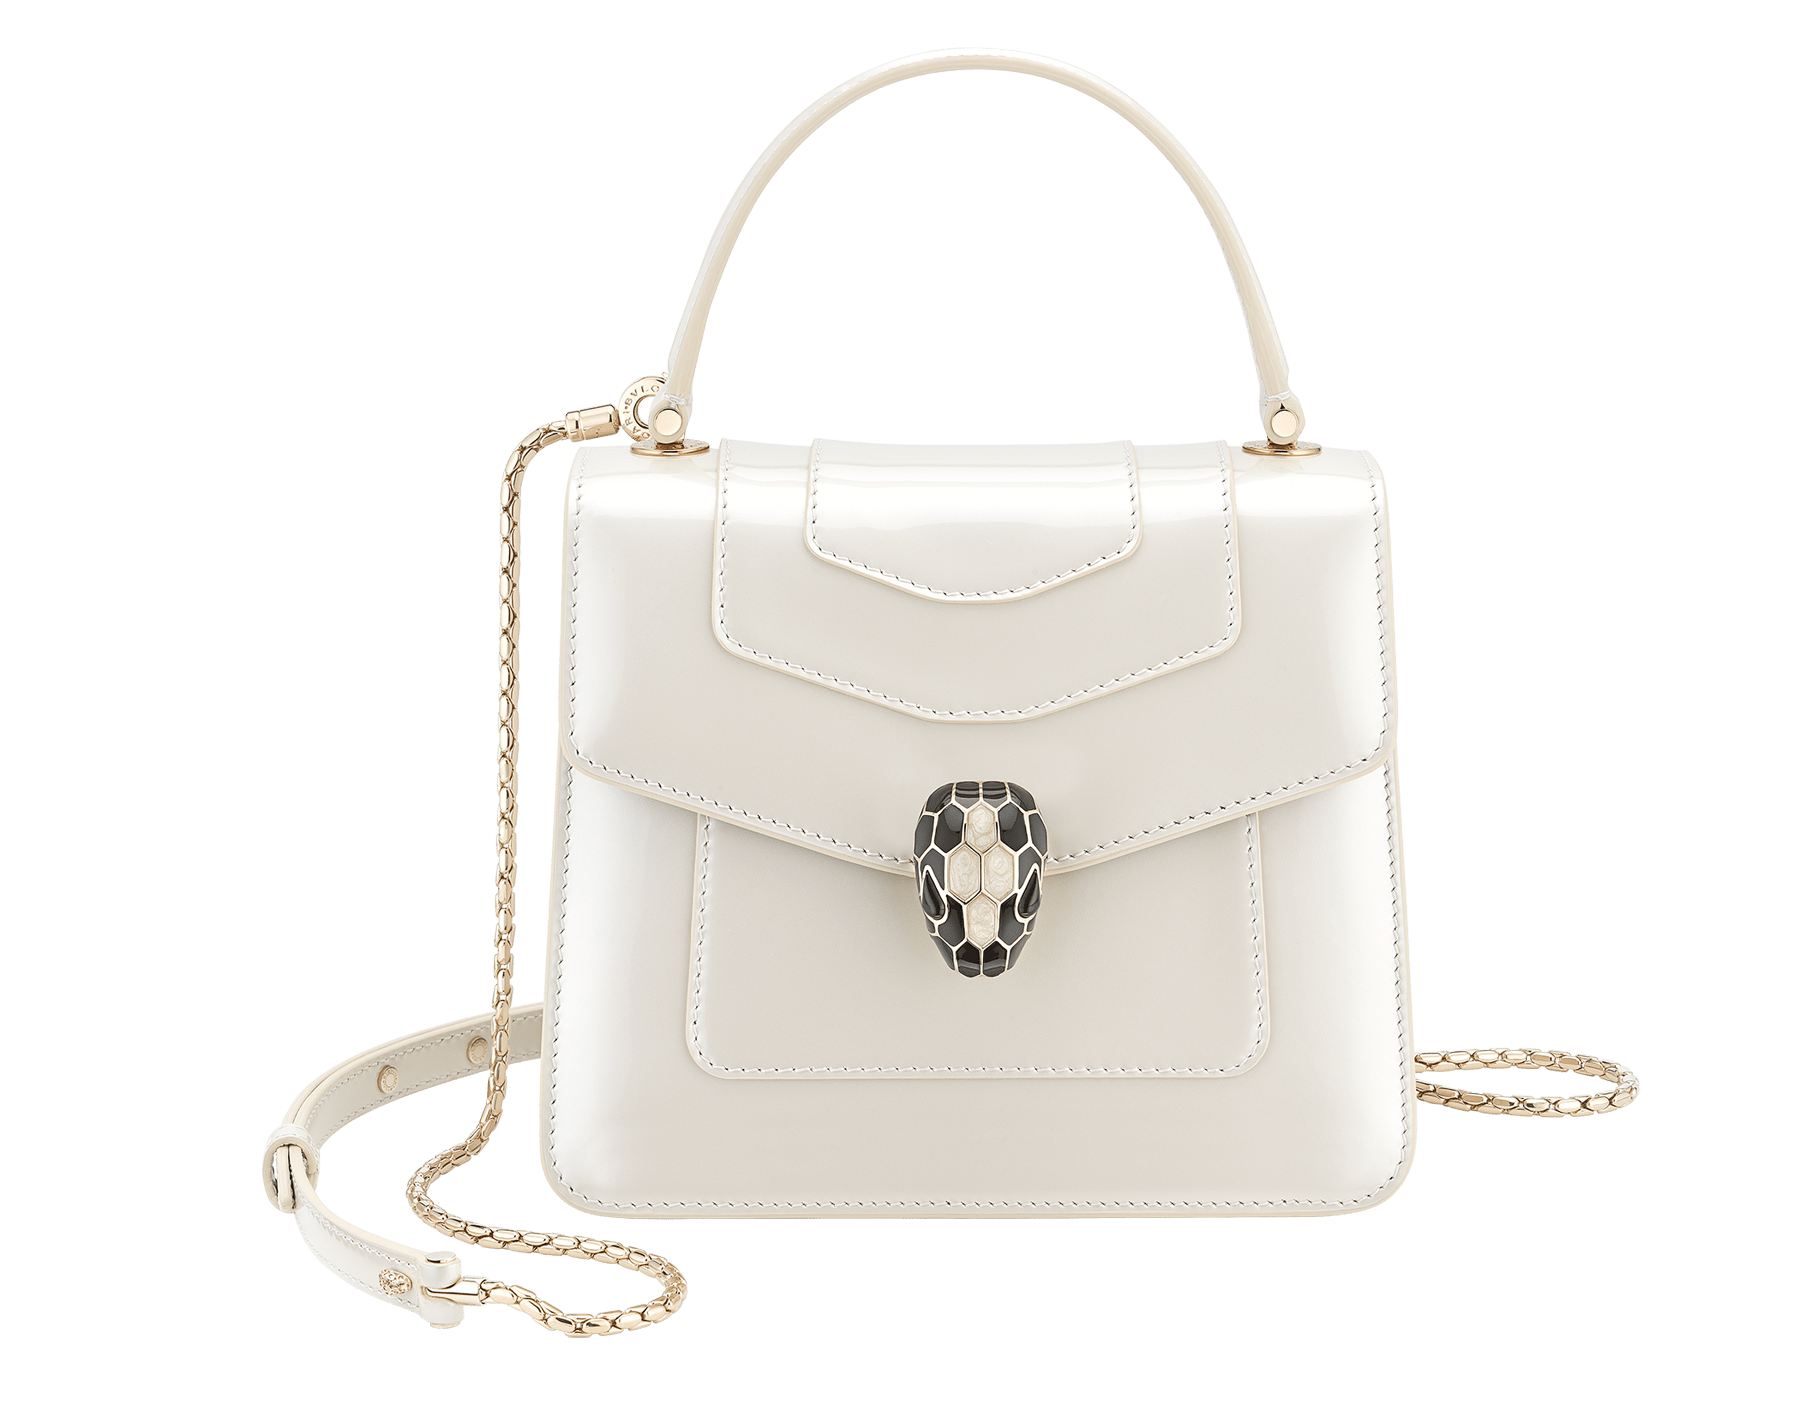 “Serpenti Forever” top-handle bag in agate-white calfskin with a polished, pearly finish and black grosgrain inner lining. Alluring snakehead closure in light gold-plated brass enriched with black and pearly, agate-white enamel and black onyx eyes 1122-VCL image 1